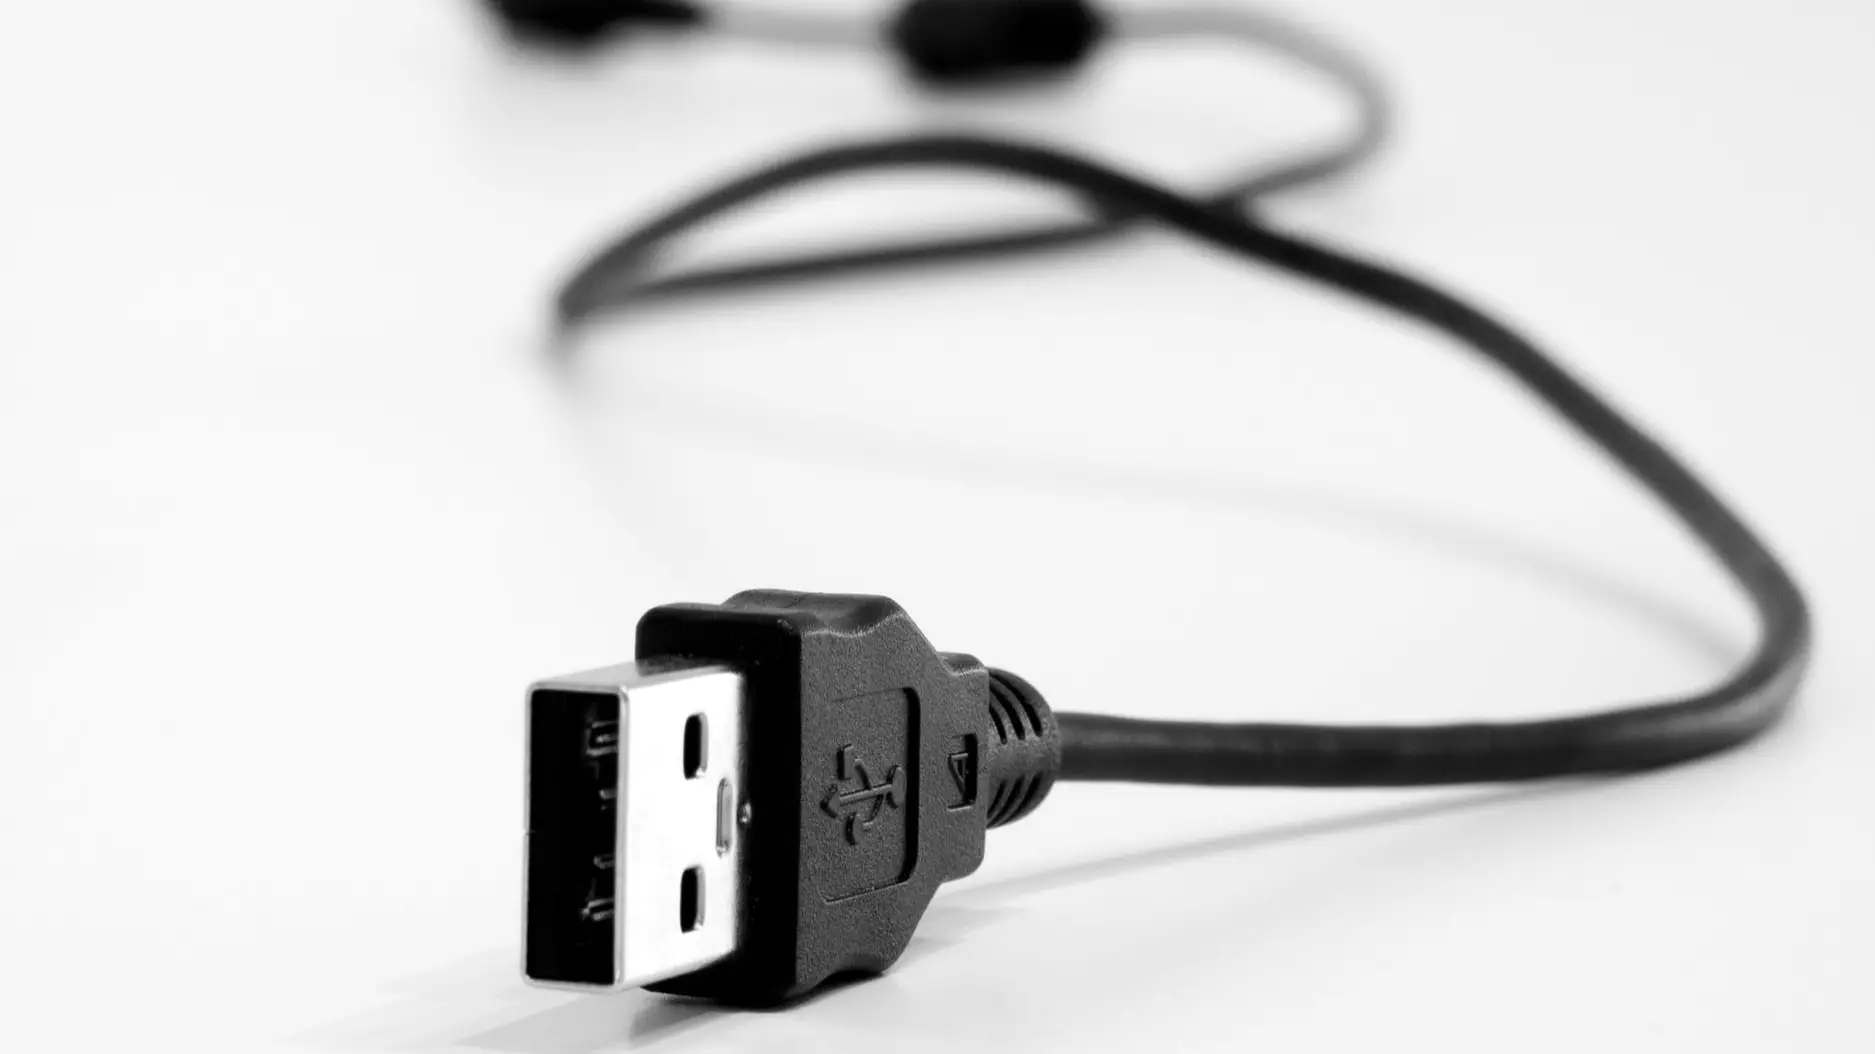 Two-Year-Old Girl Dies After Being Electrocuted From Putting Charger In Her Mouth